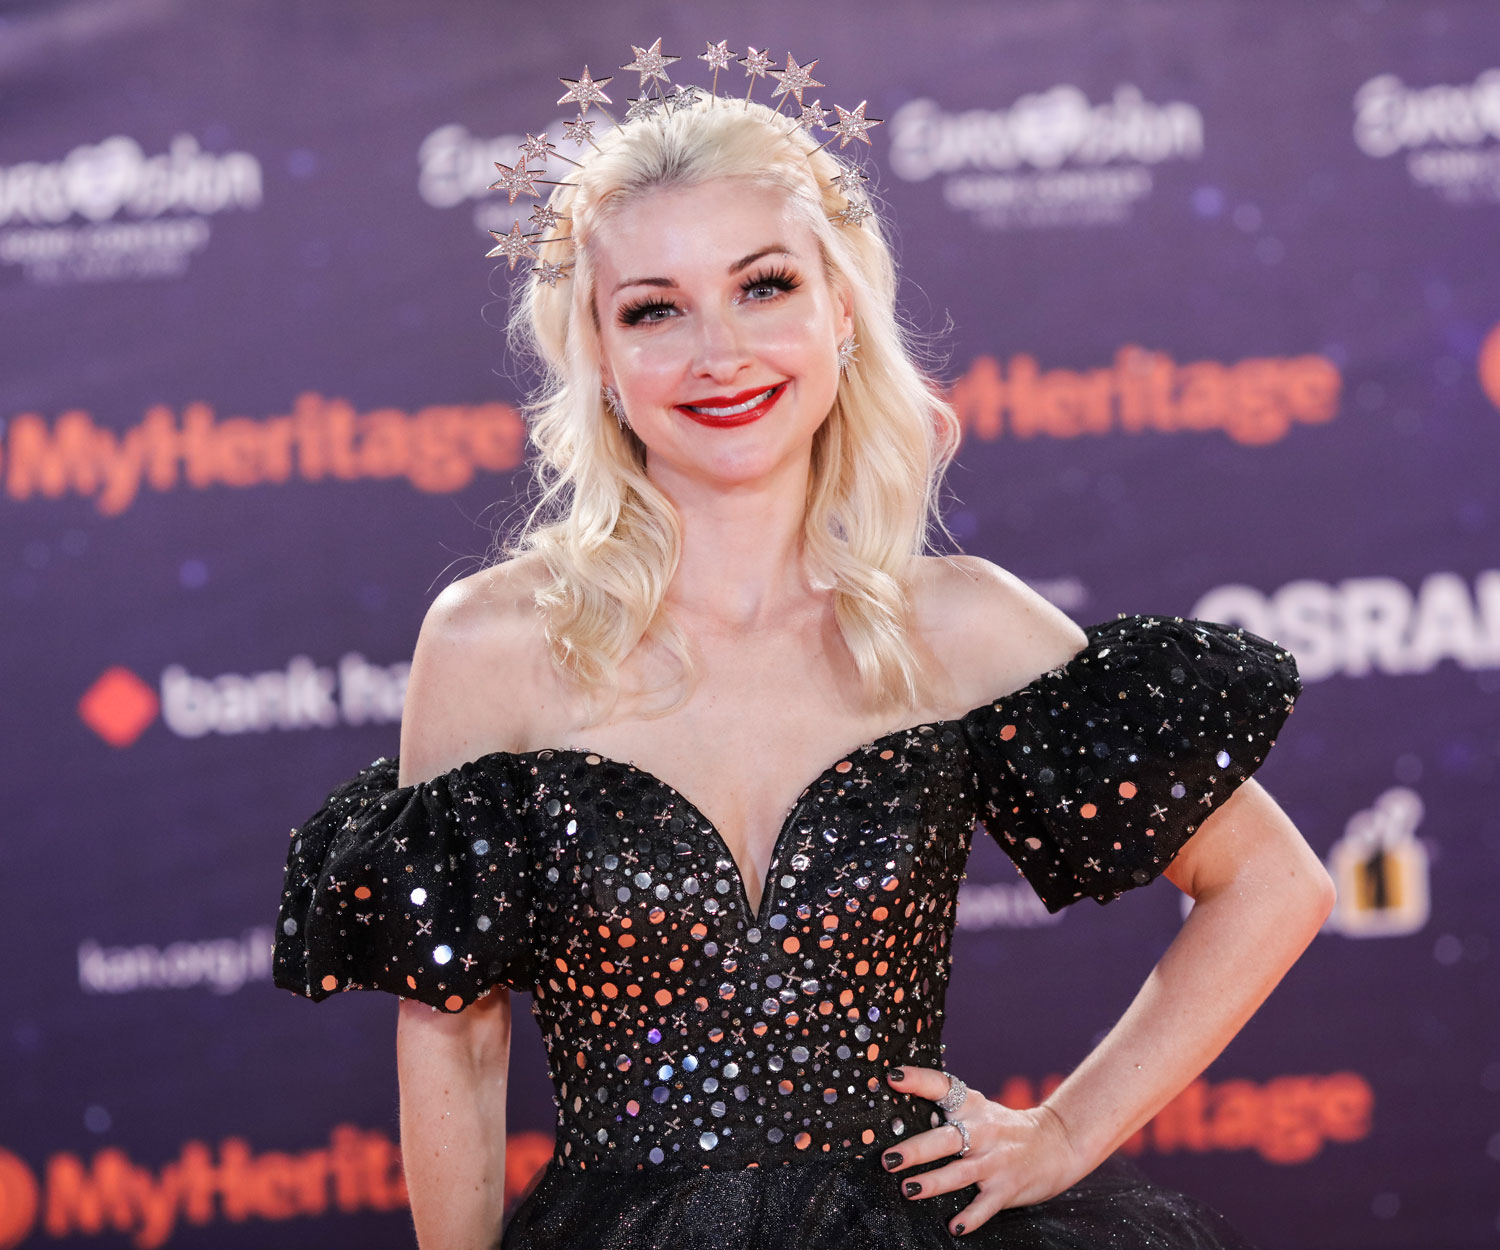 Kate Miller-Heidke on the meaning behind her powerful Eurovision song Zero Gravity